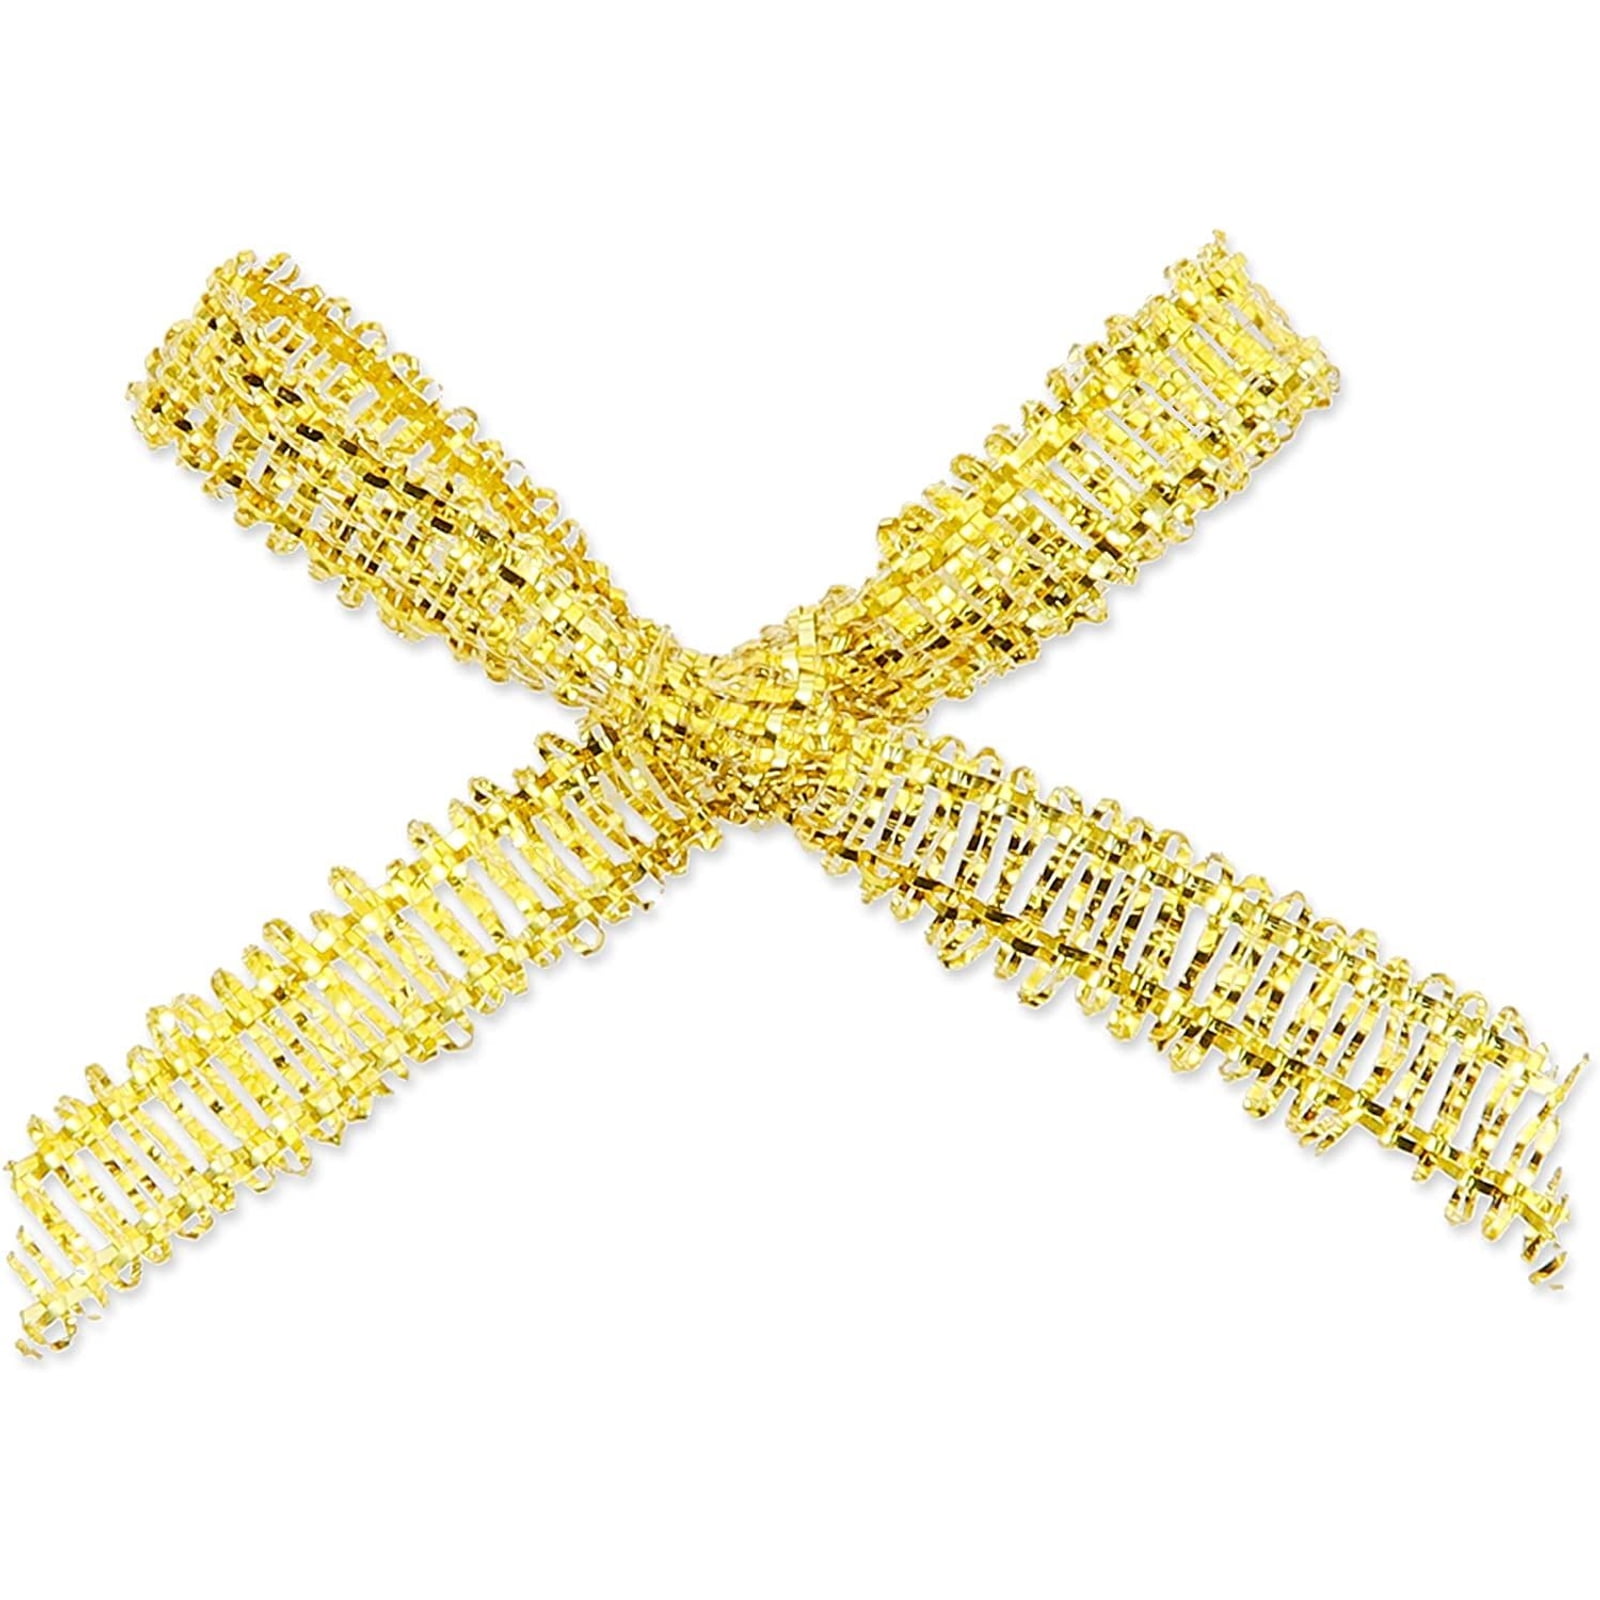 500pcs 1.2 Gold Mini Bibbon Bows Appliques for DIY Crafts, Gift Wrapping  Accessories and Scrapbooking